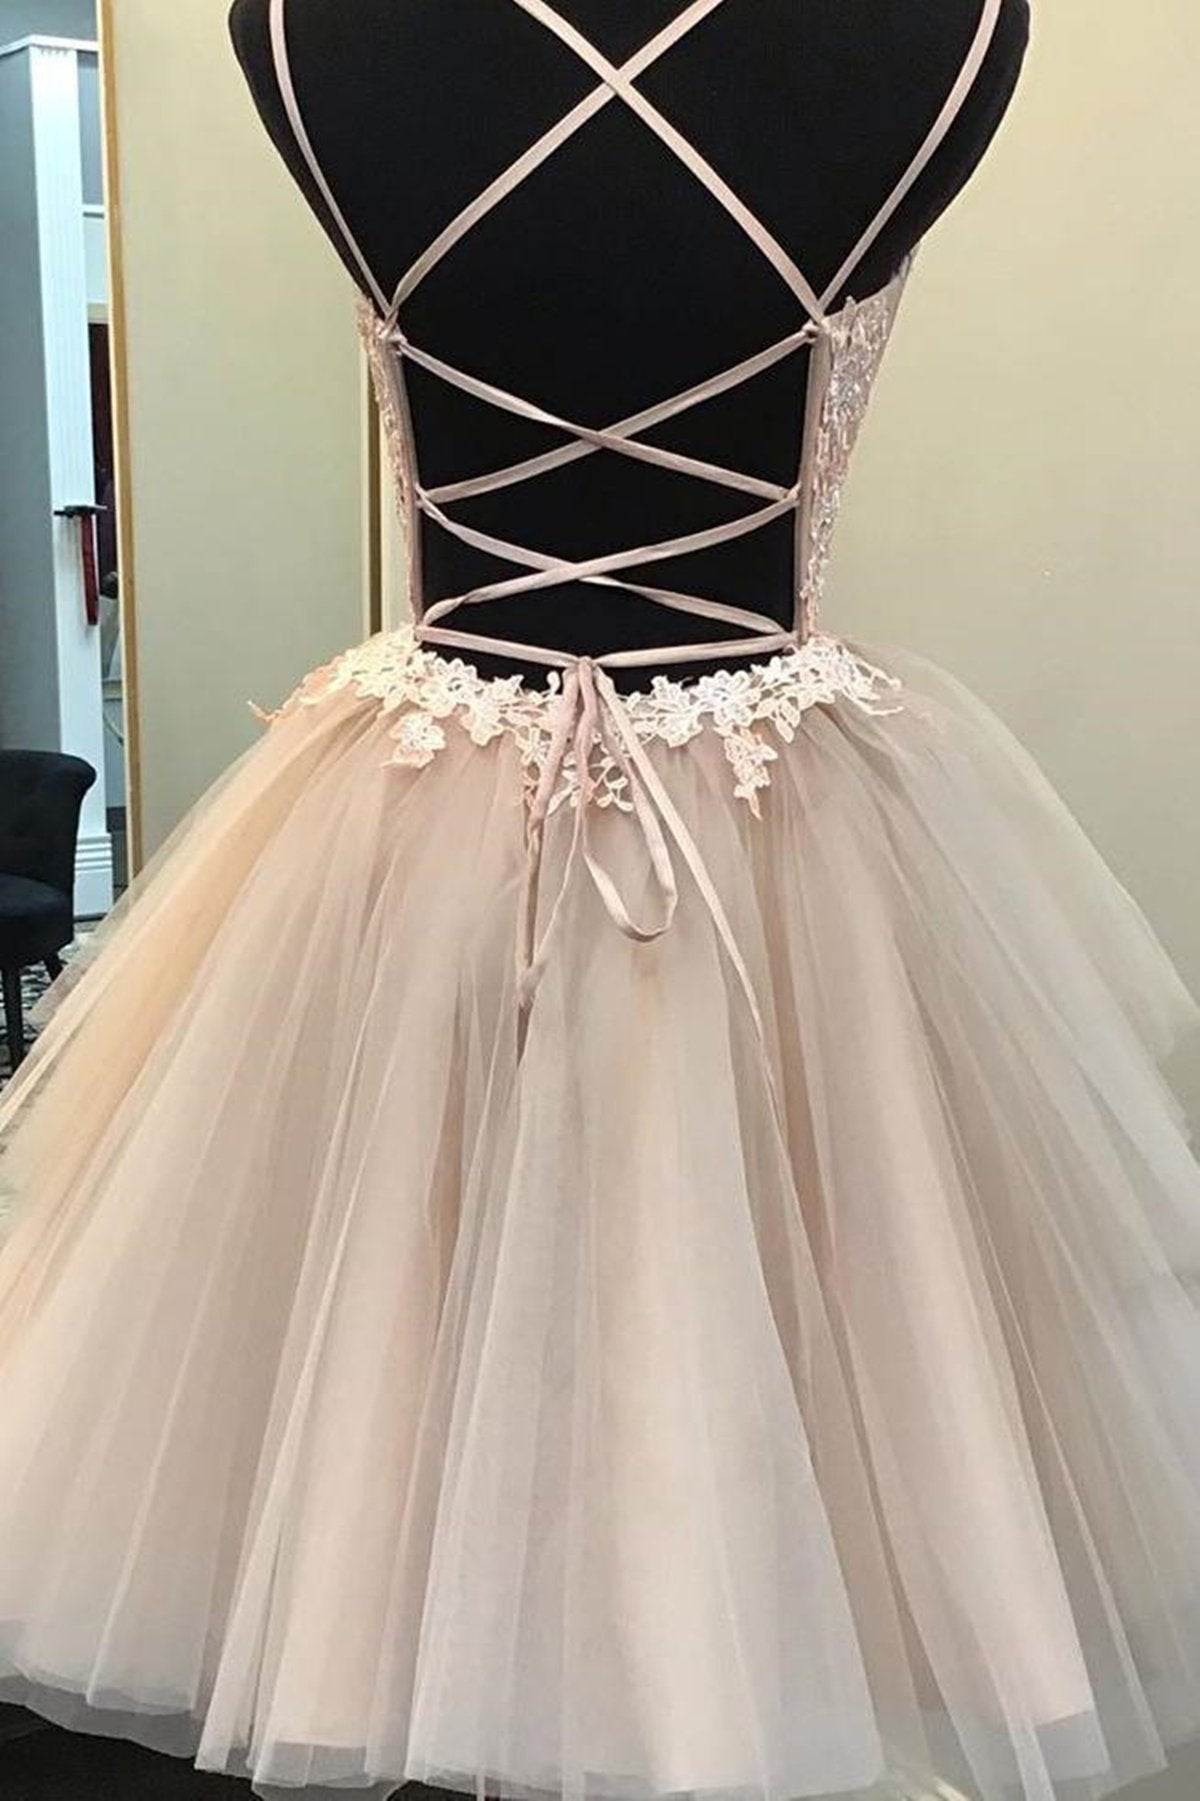 Prom Dress Lace, Short Backless Champagne Lace Prom Dresses, Short V Neck Champagne Lace Graduation Homecoming Dresses